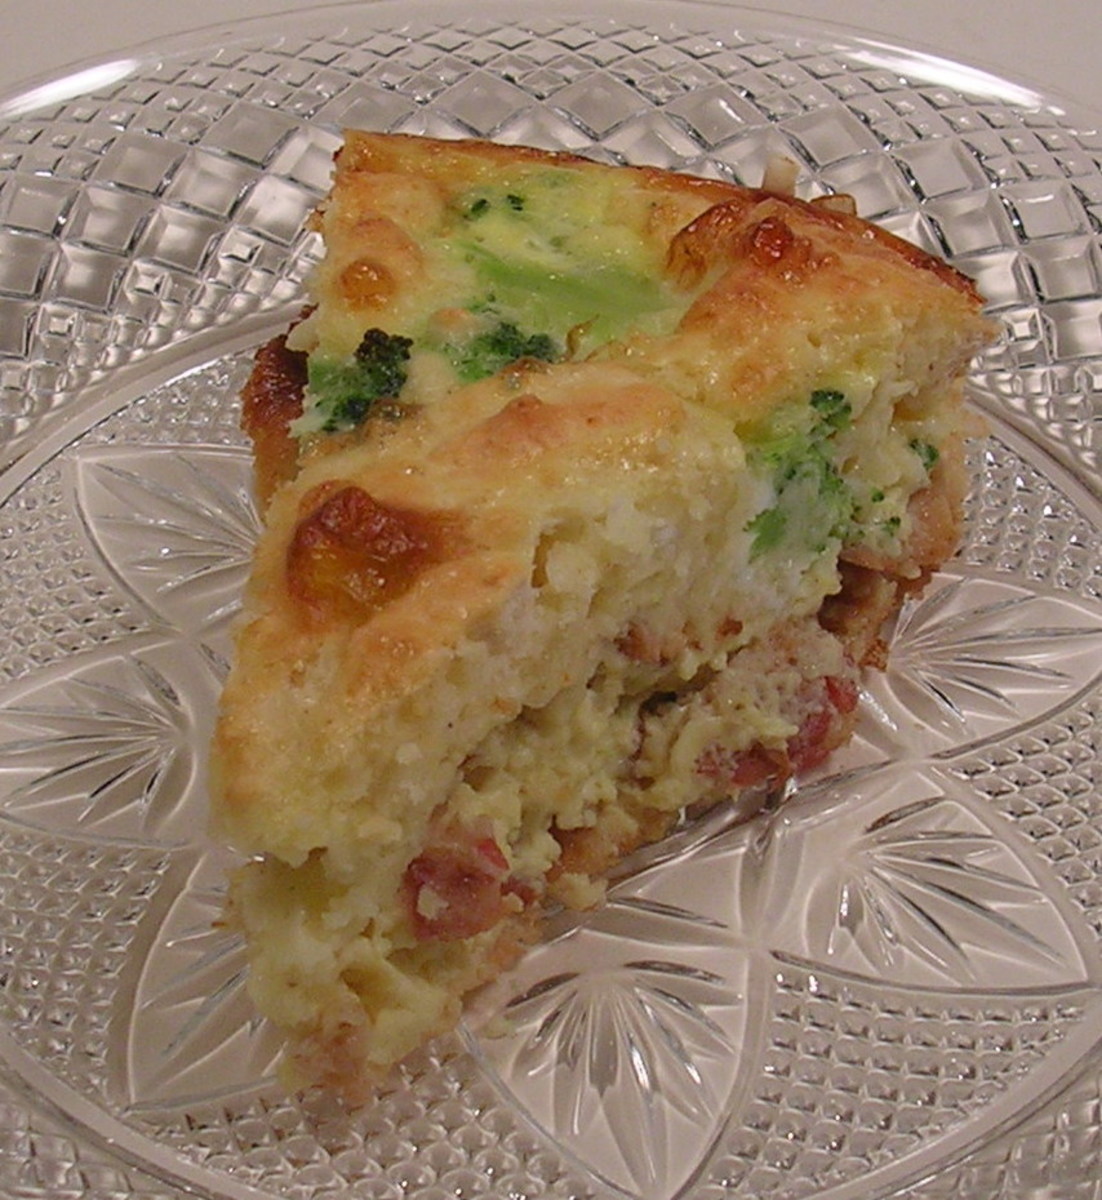 In this Impossible Quiche variation, I added about a cup of coarsely chopped frozen broccoli.